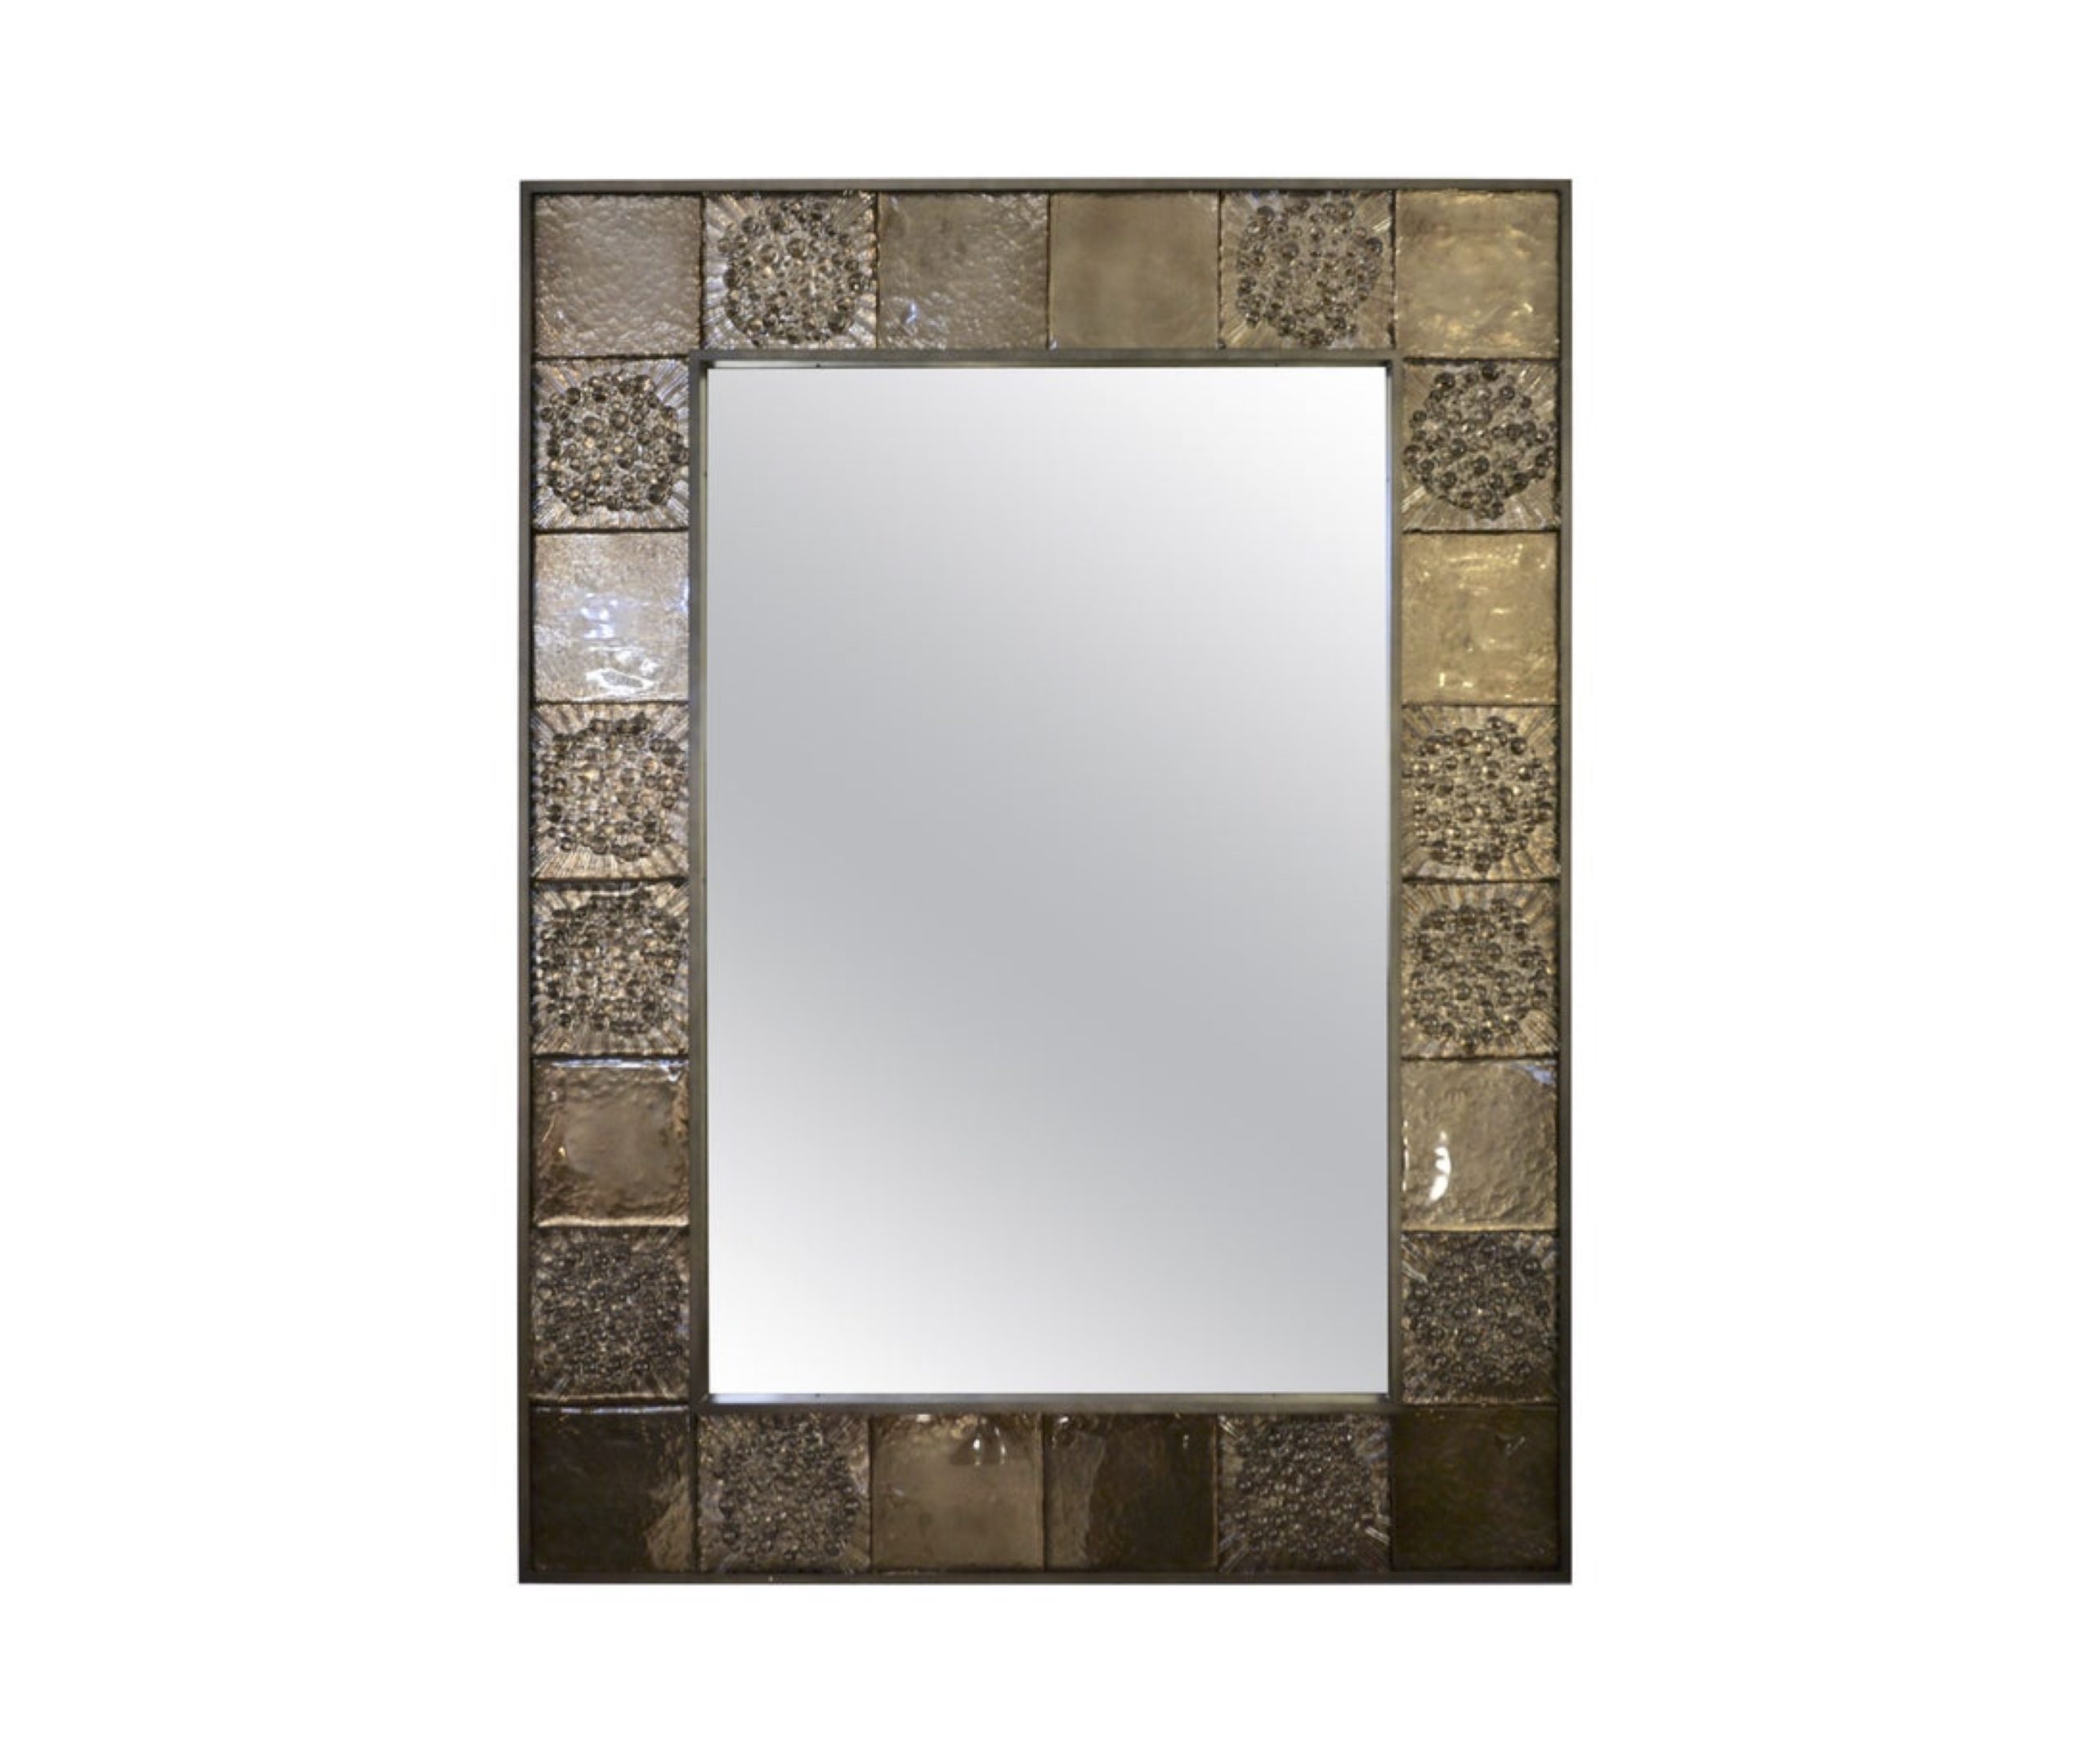 cosulich_interiors_and_antiques_products_new_york_design_bespoke_italian_smoked_amber_mirror_murano_glass_geometric_bronze_tiled_mirror-scaled-1